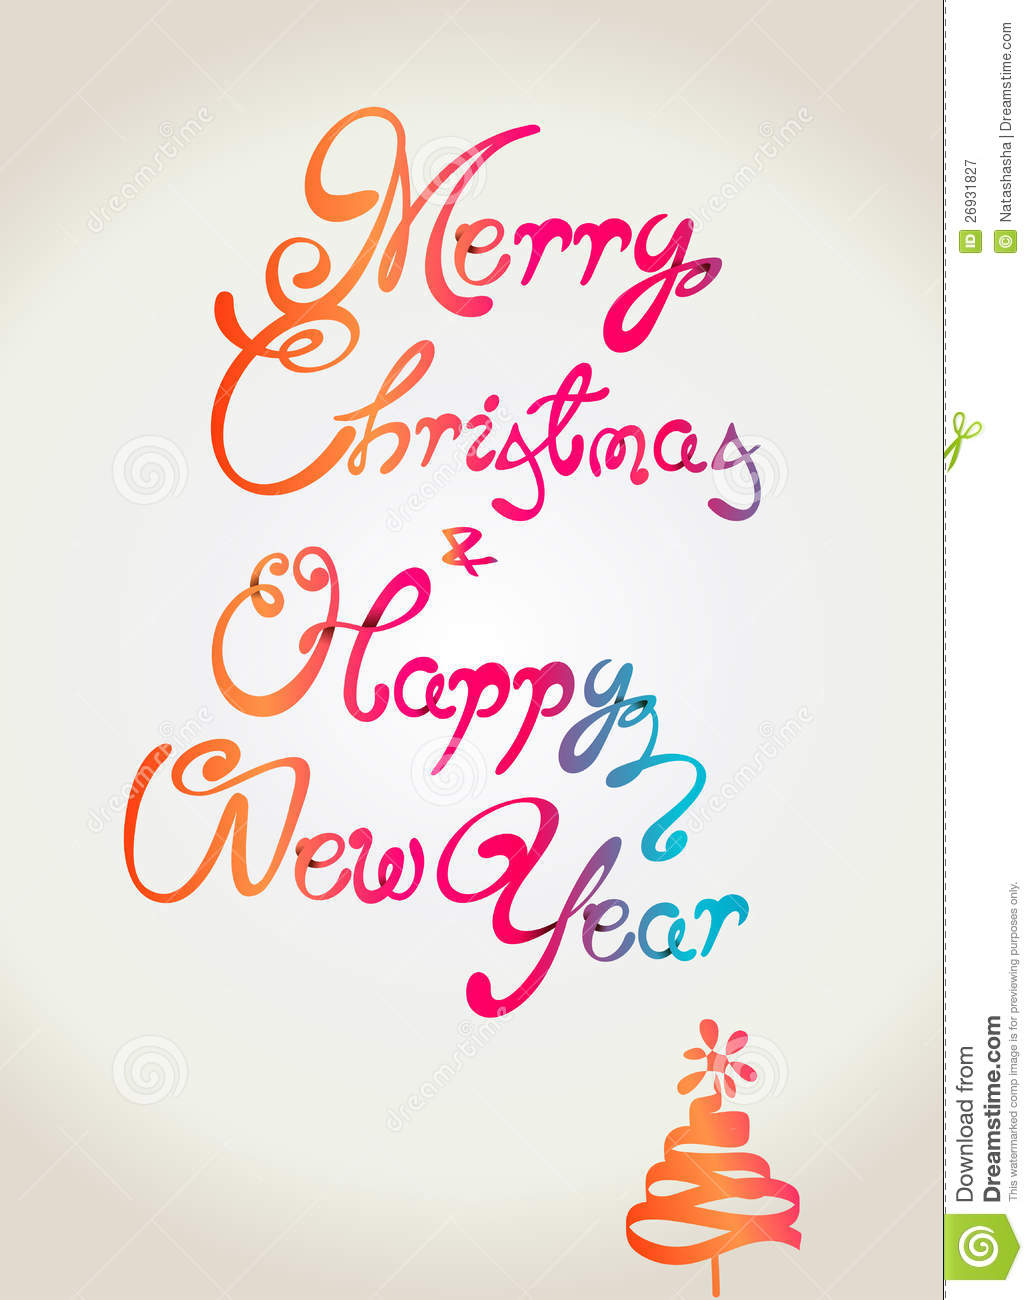 Christmas And New Year Clip Art Free.